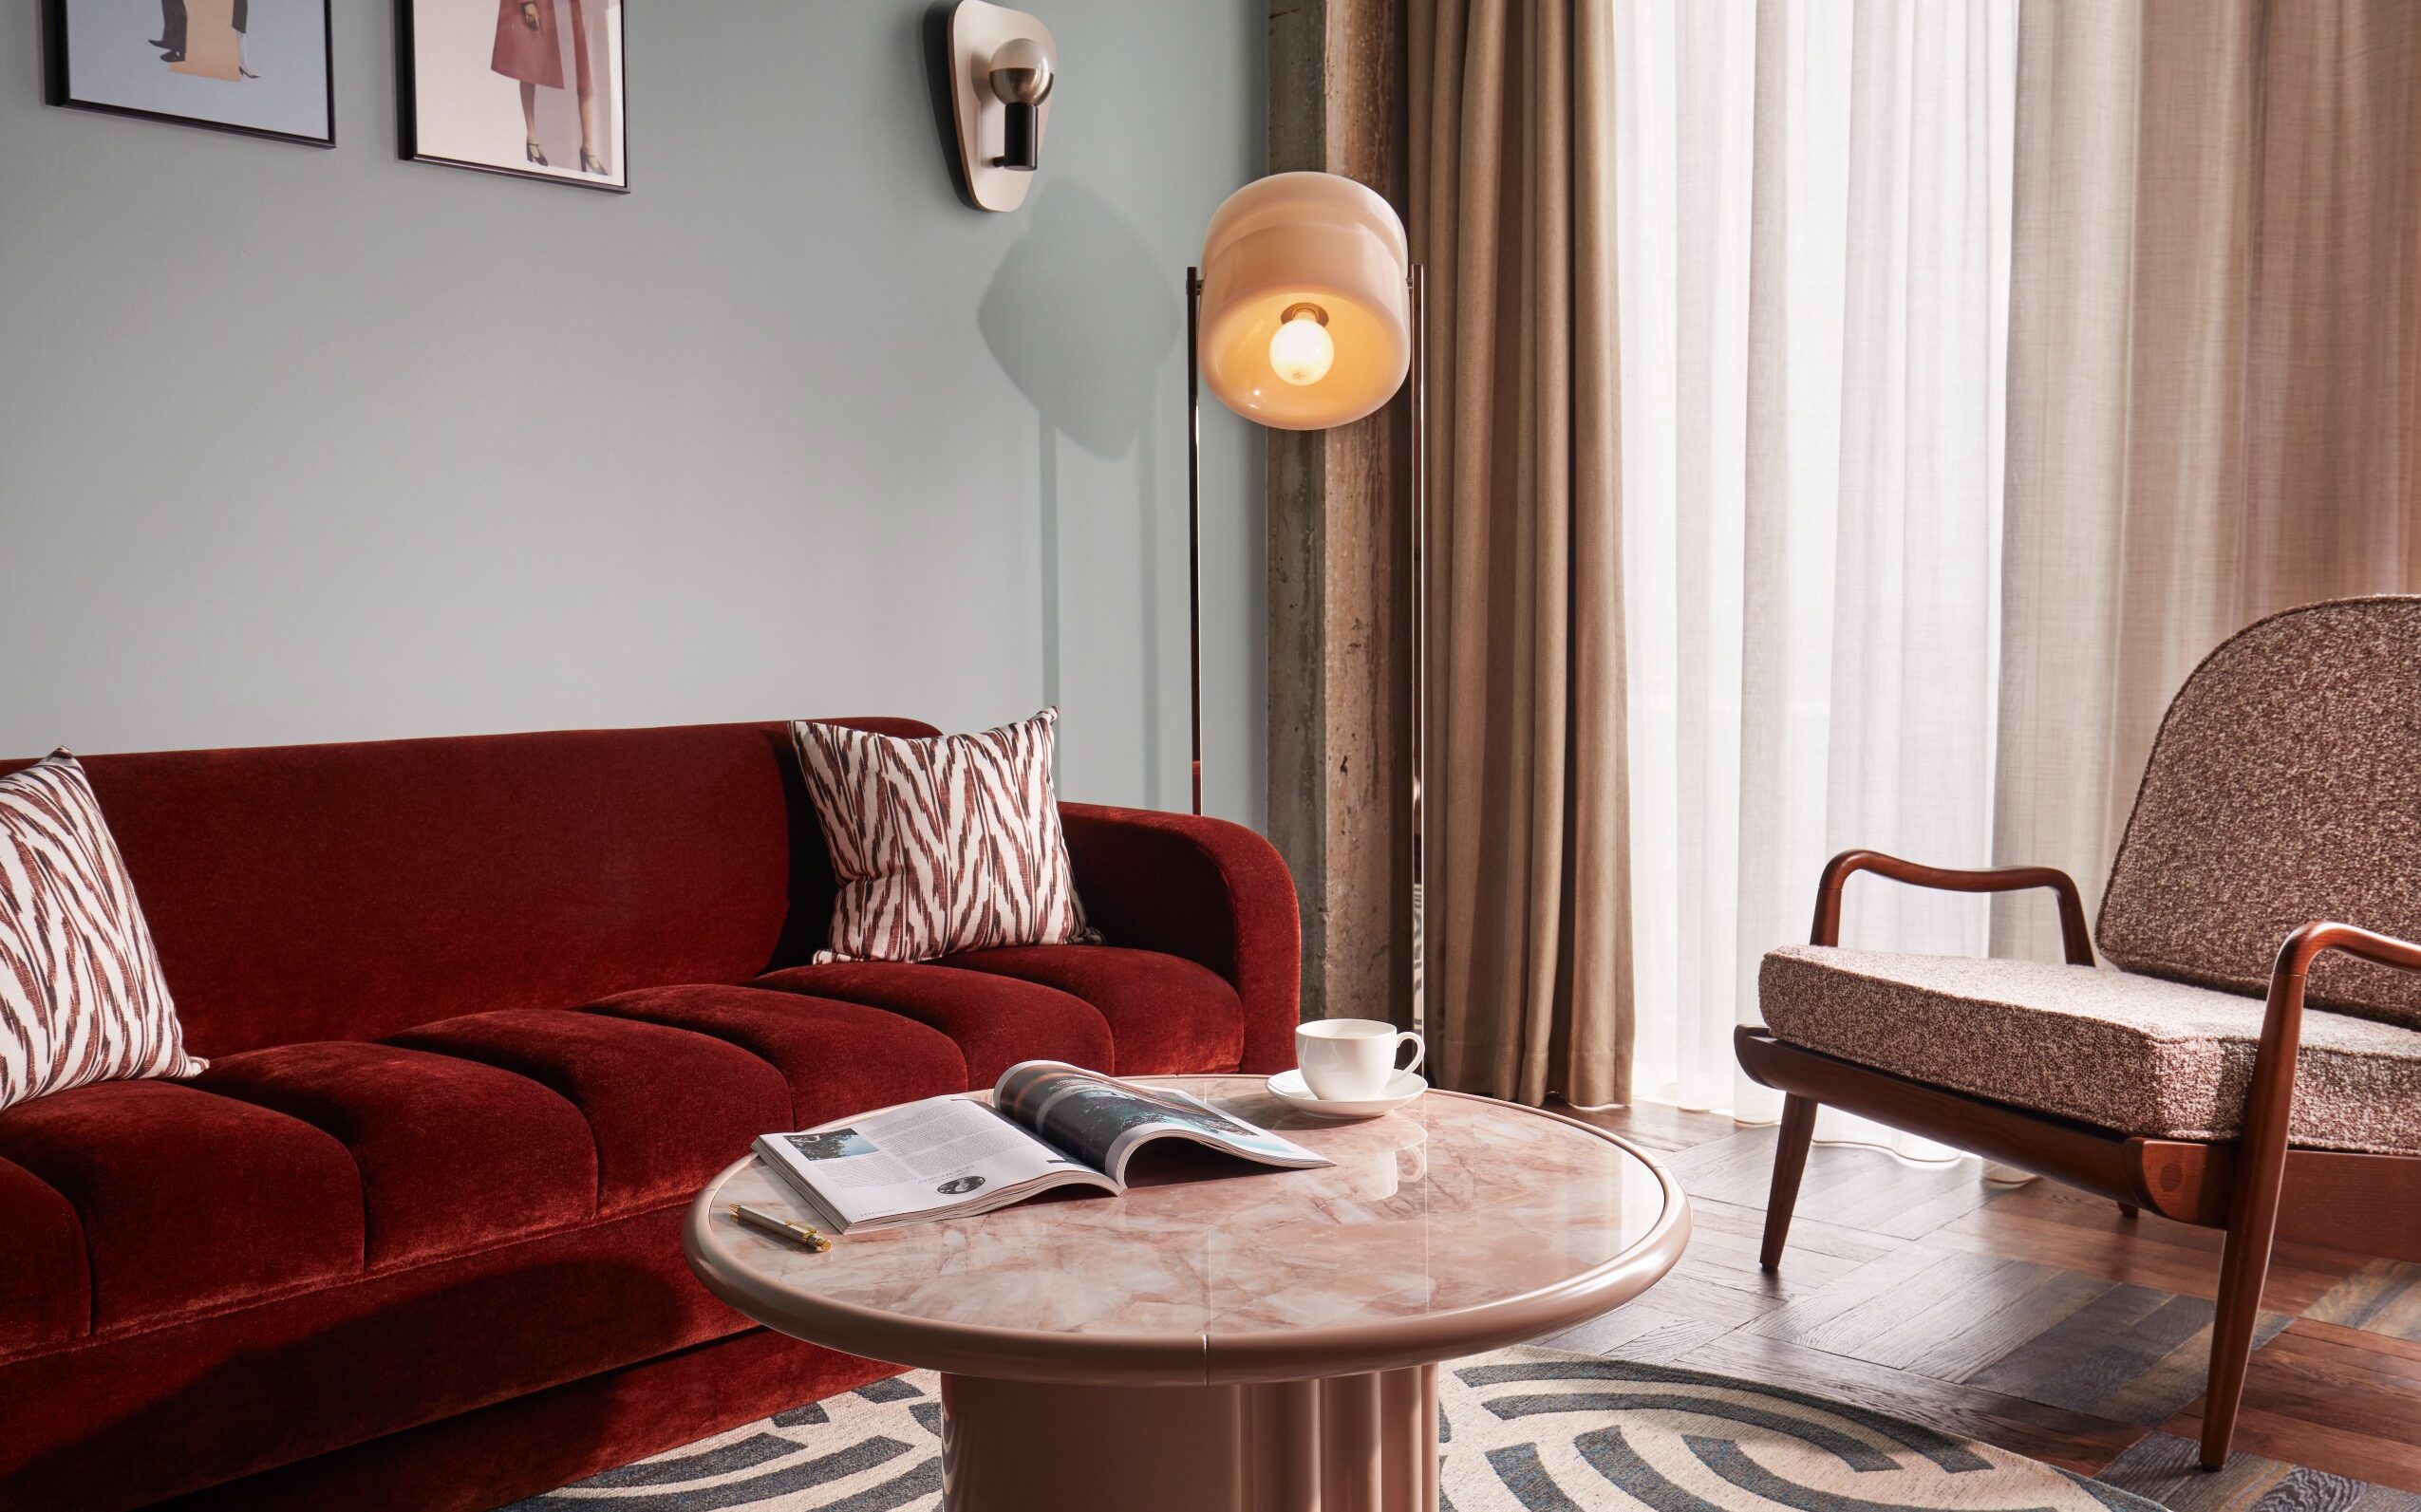 This Brussels Hotel’s Interior Champions a 1970s Revival Aesthetic